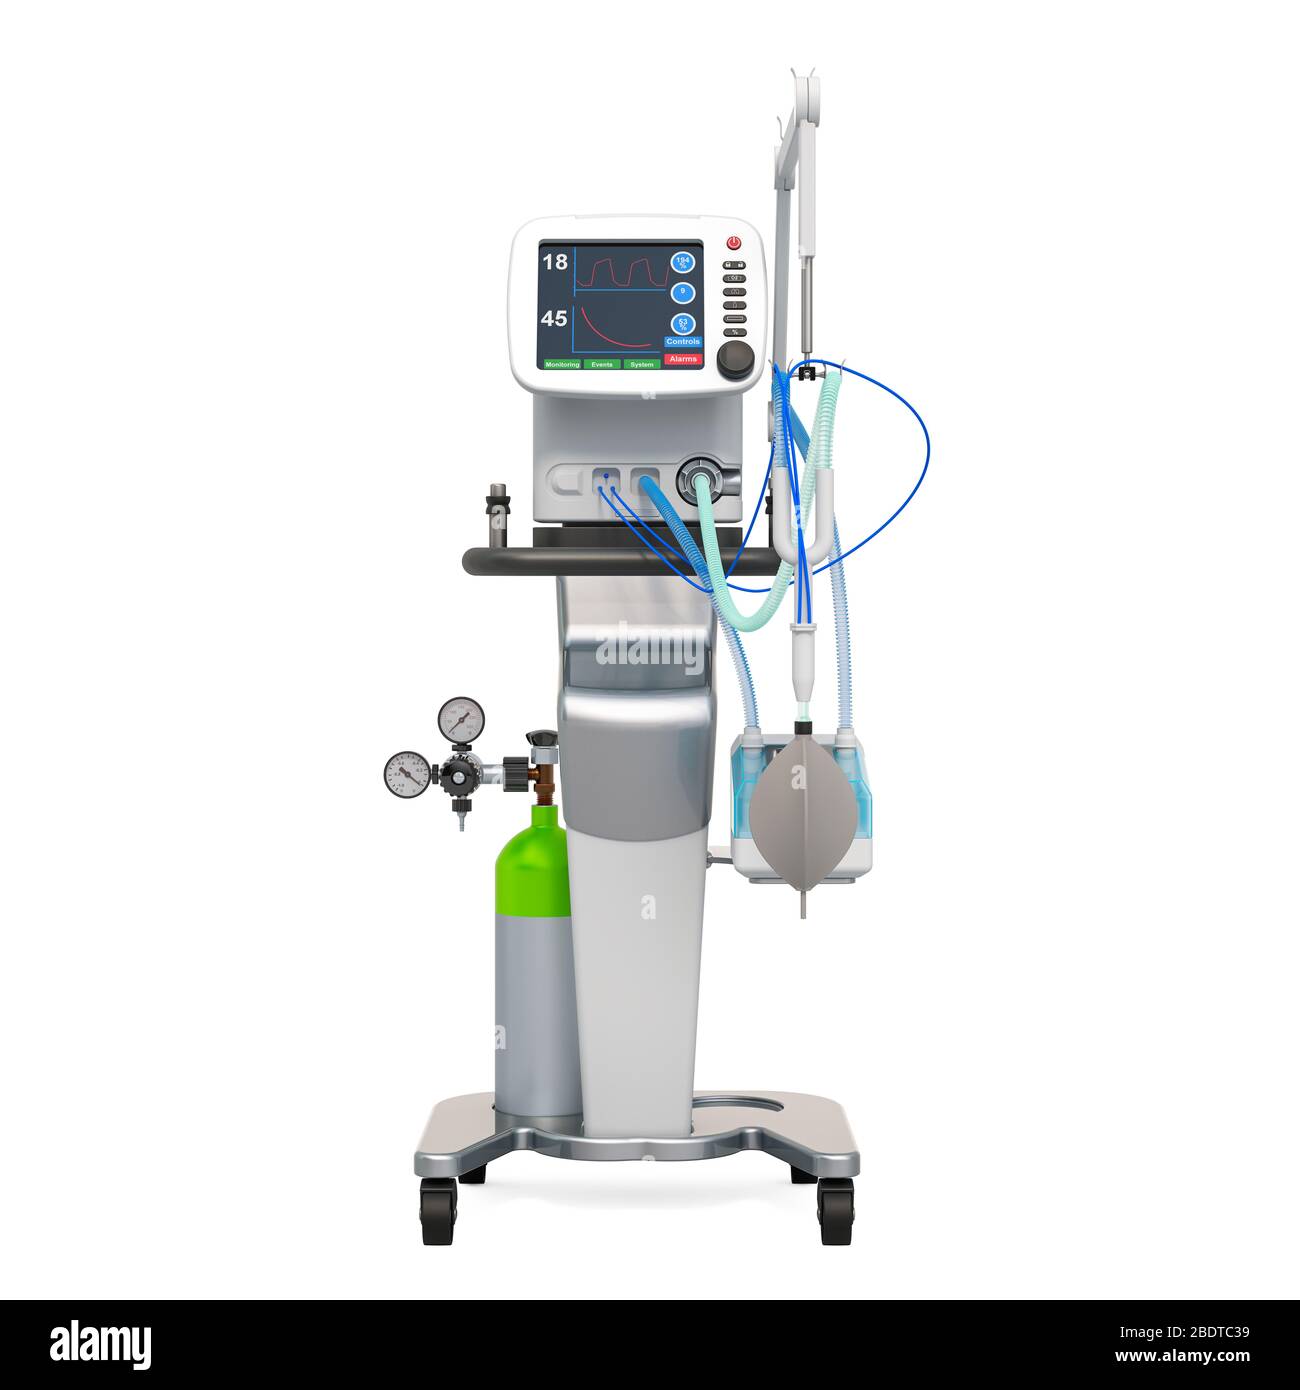 Medical ventilator, front view. 3D rendering isolated on white background Stock Photo